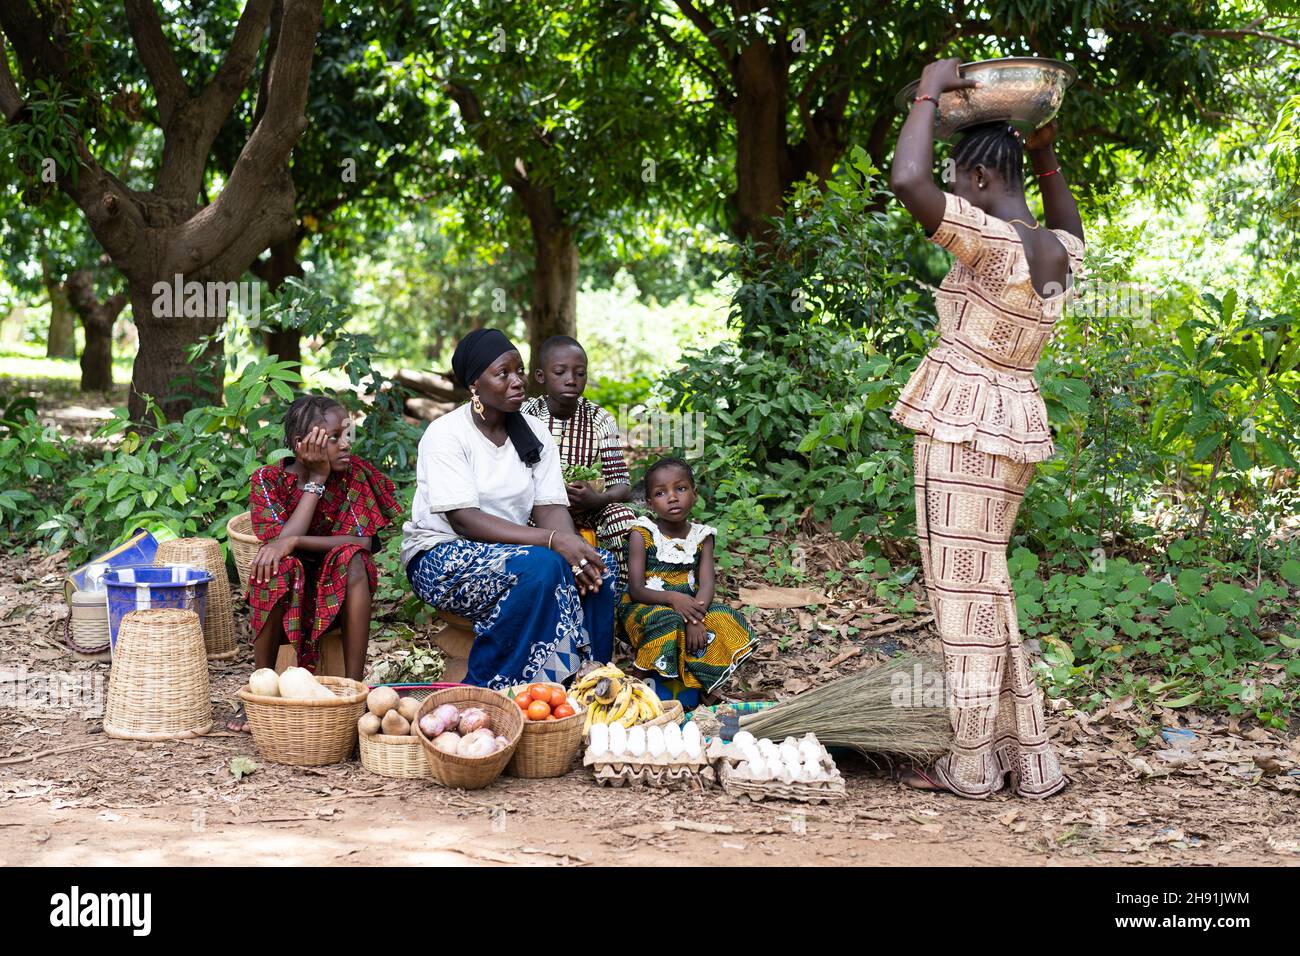 Typical African street market scene with black women and children trading home-grown vegetables and goods Stock Photo